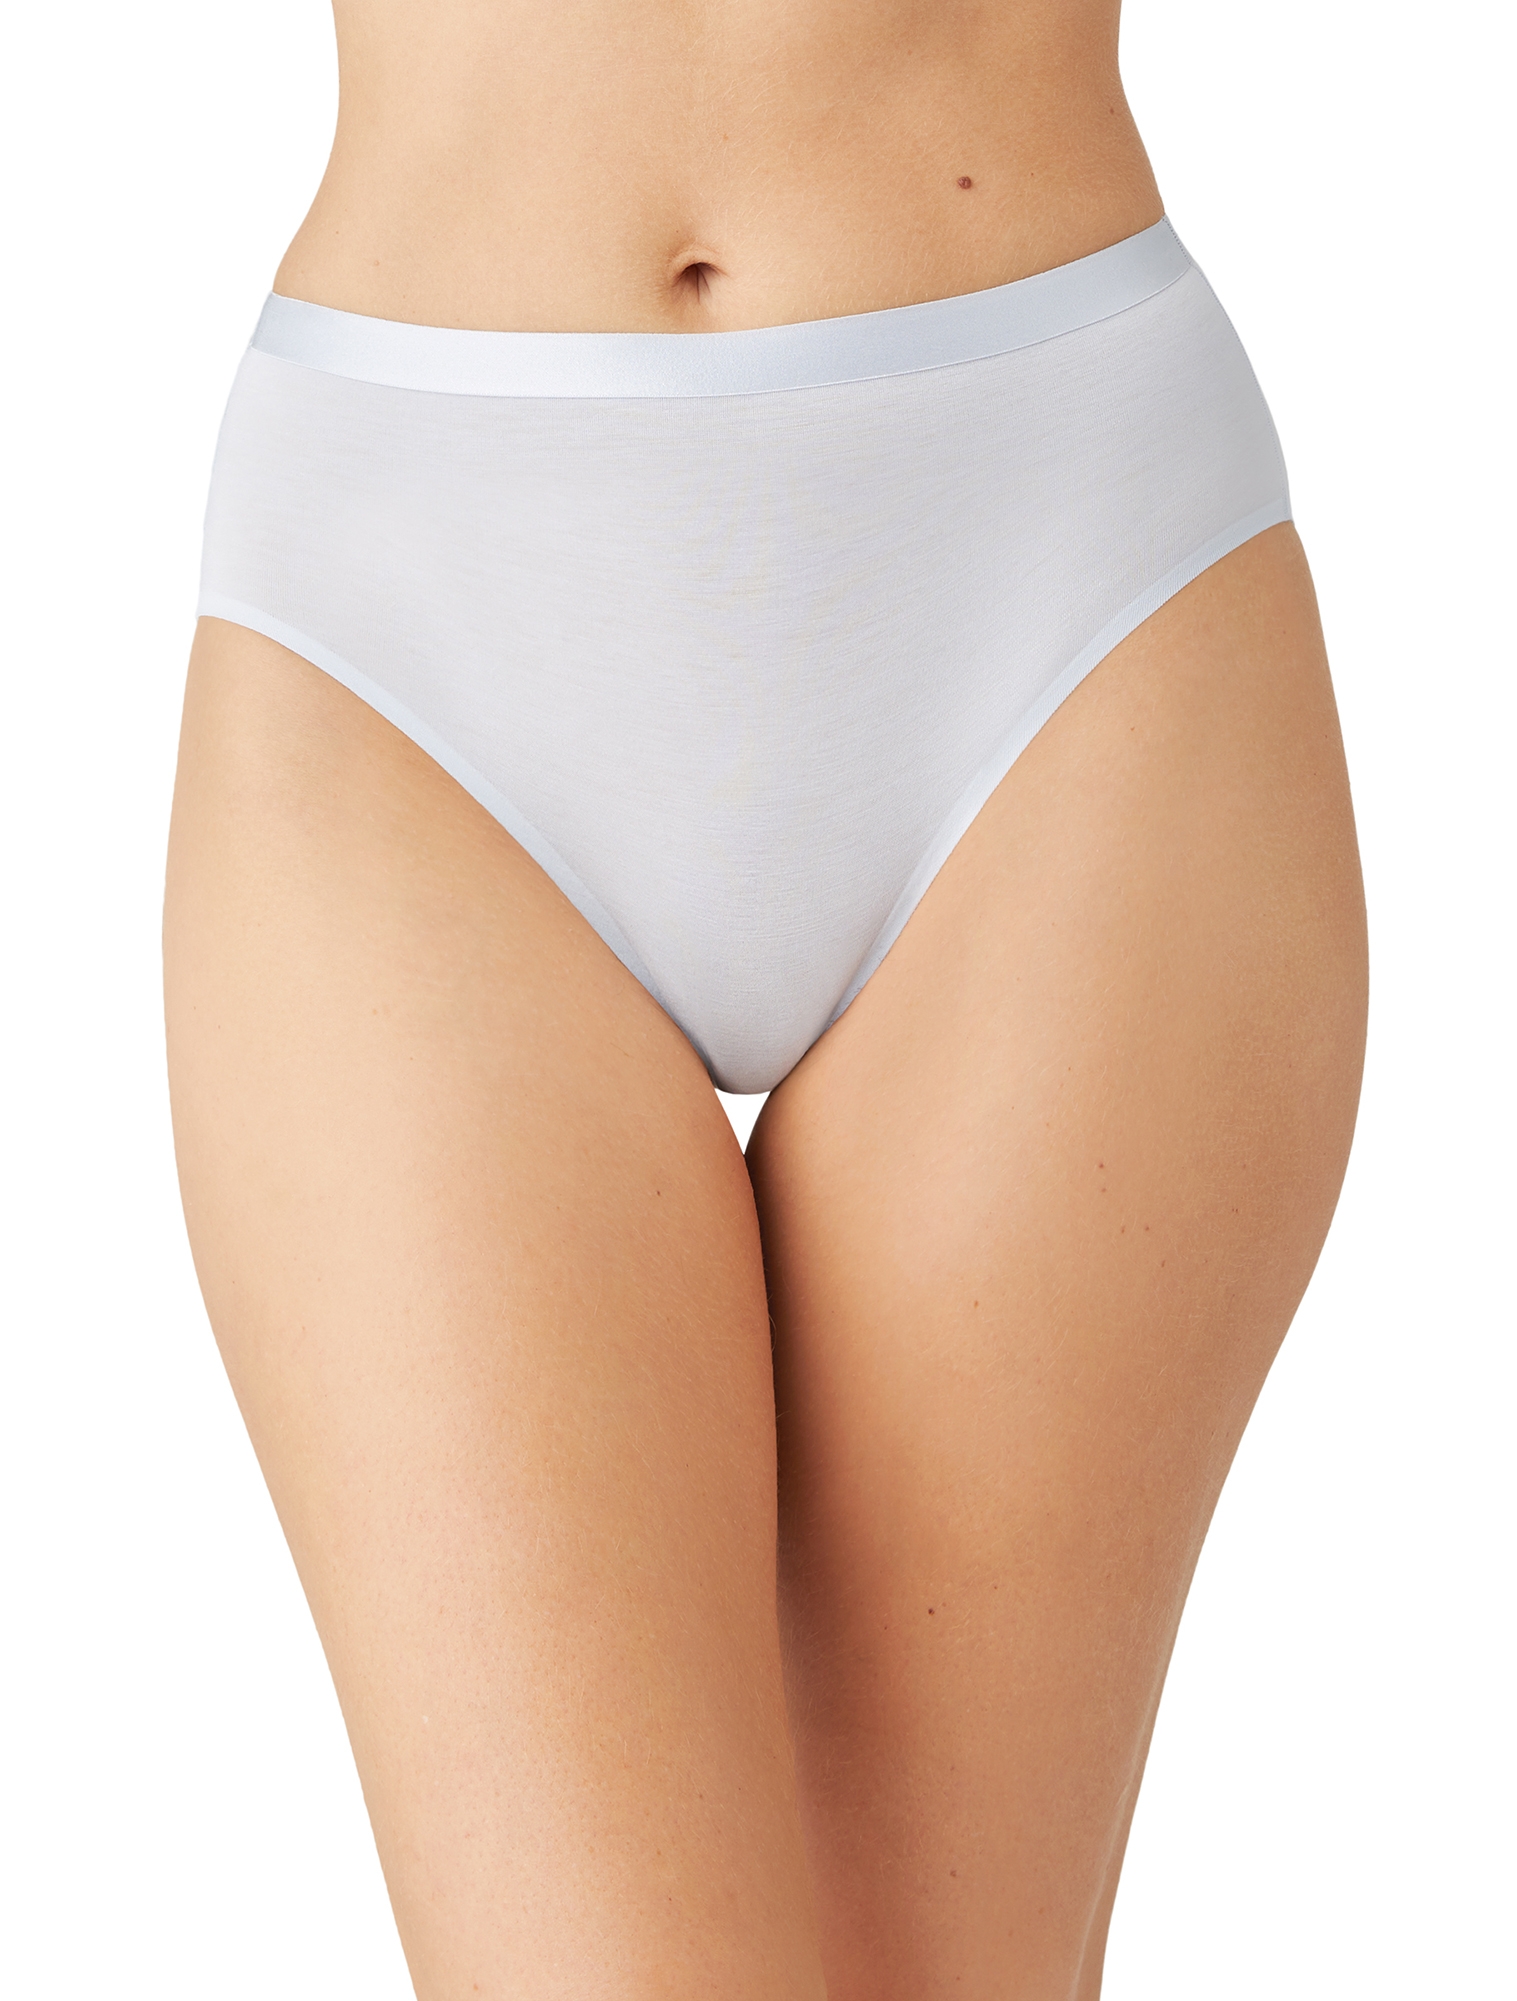 Wacoal Halo Lace High-Cut Briefs fragrant lilac • Price »